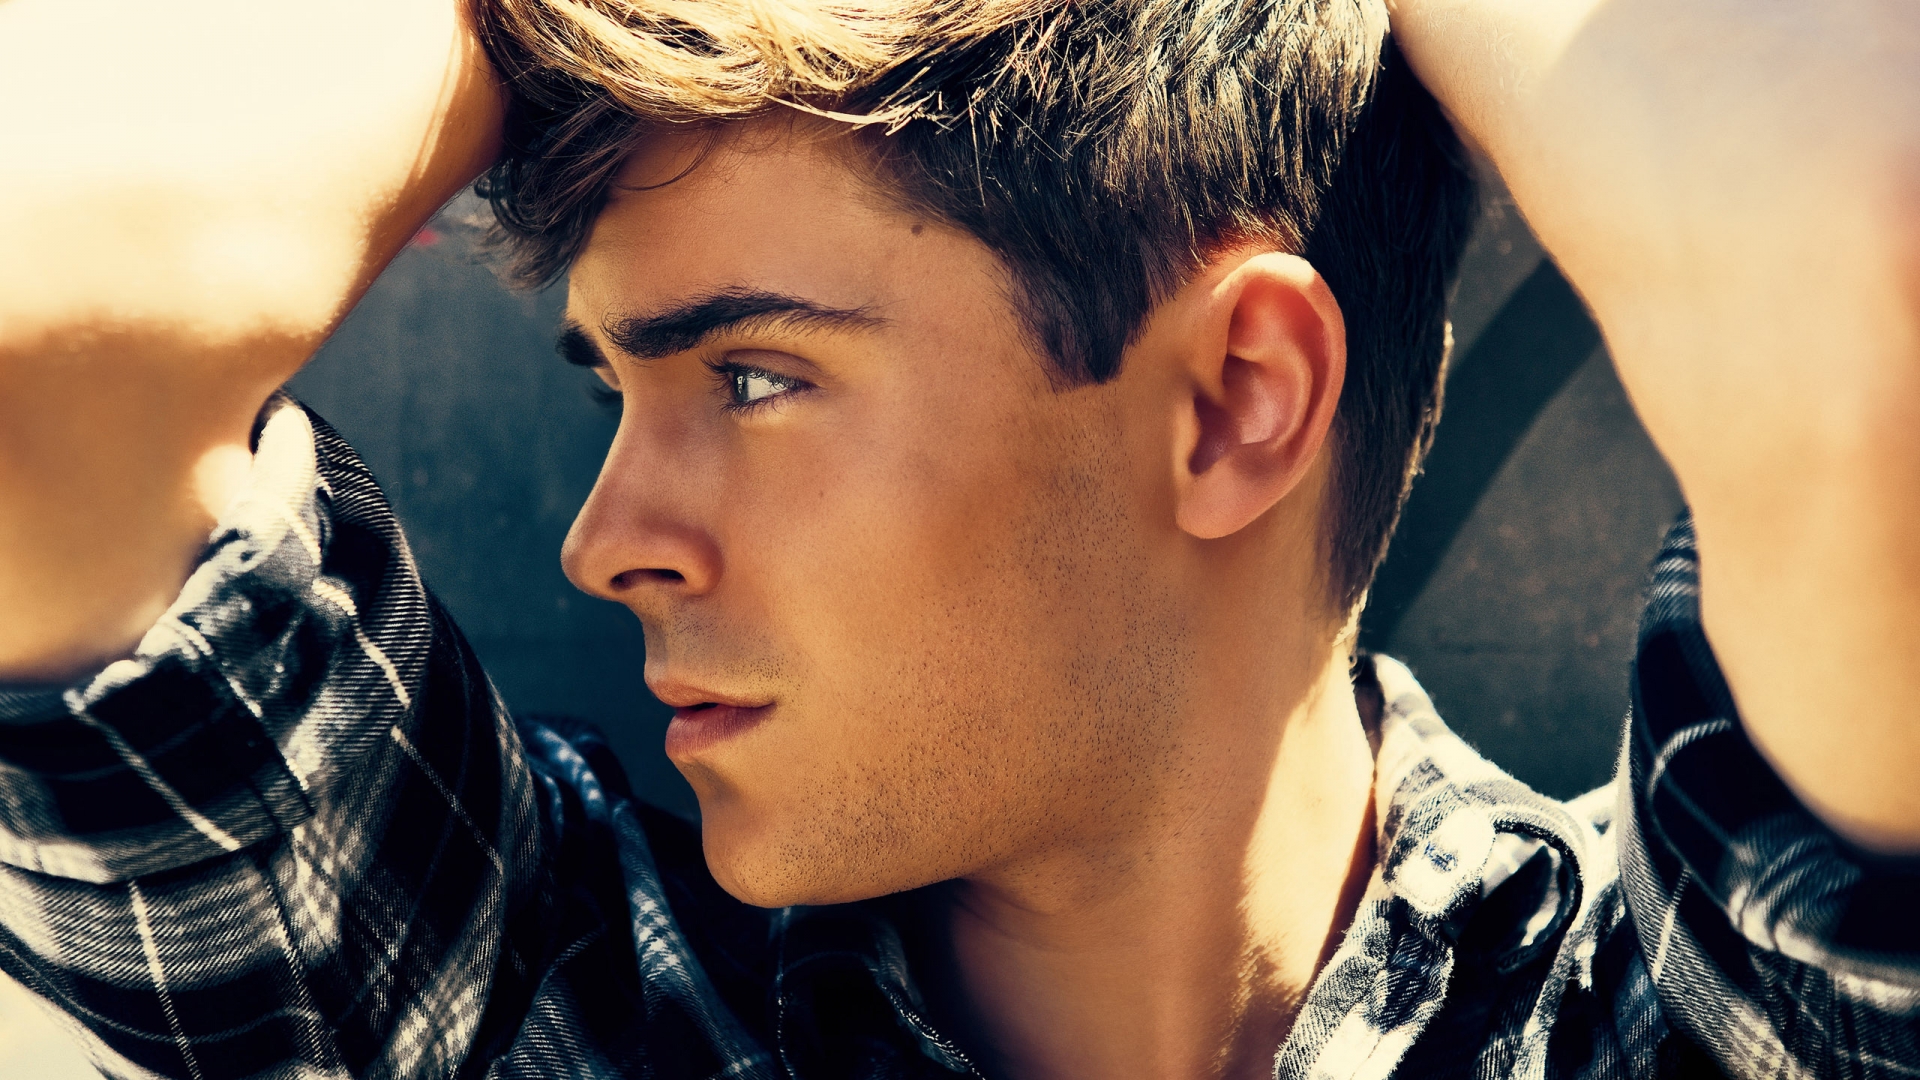 Handsome Zac Efron for 1920 x 1080 HDTV 1080p resolution